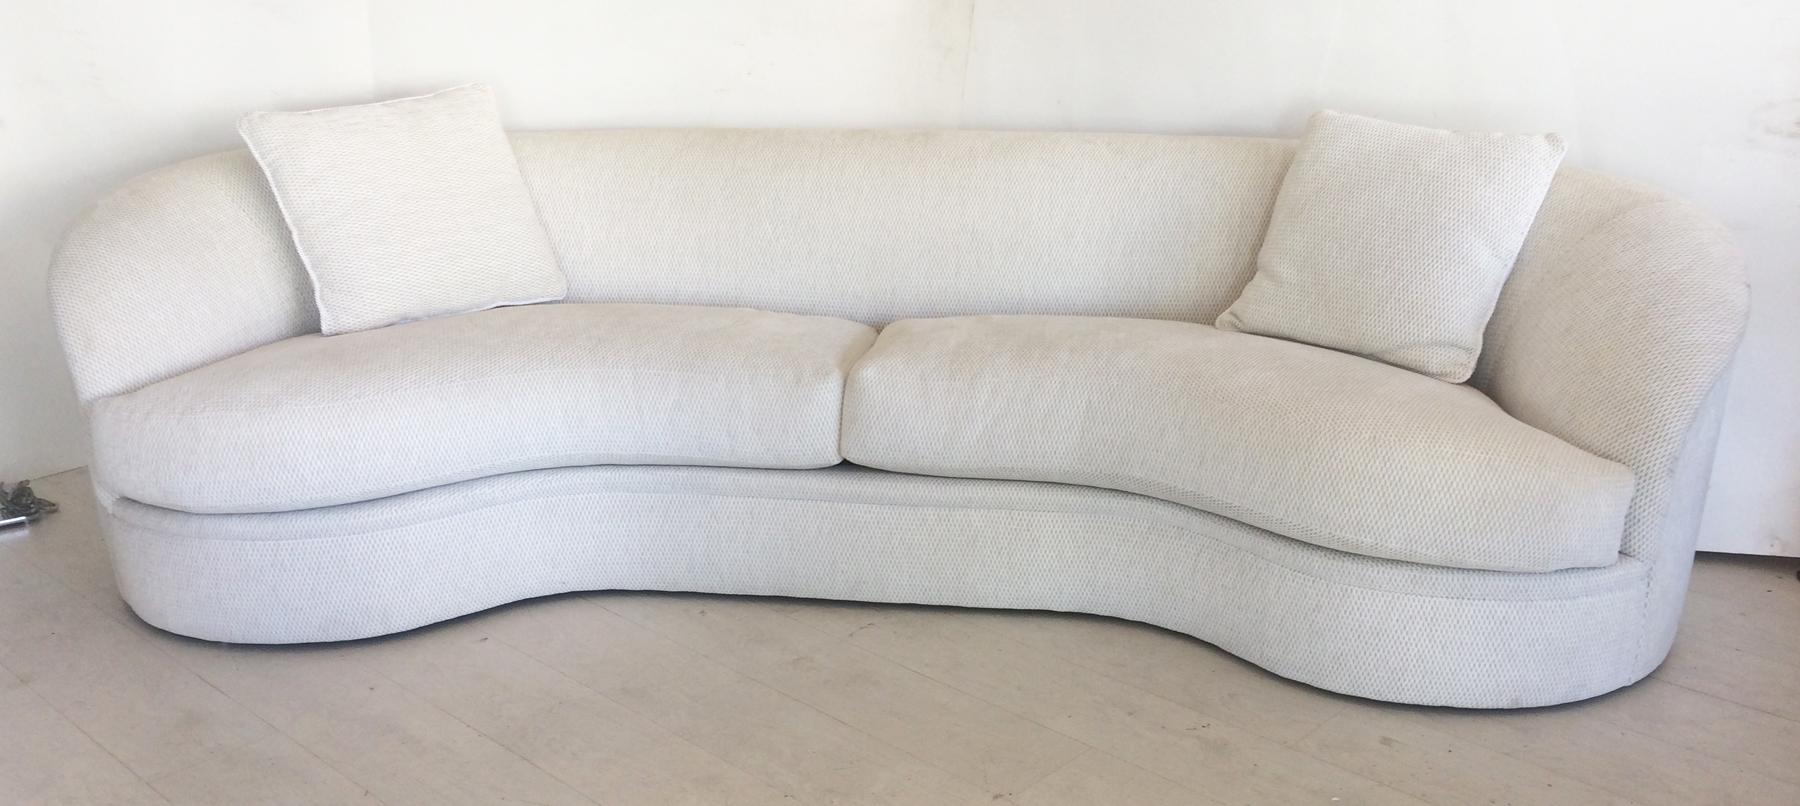 Valdimir Kagan Biomorphic Curved Sofa for Directional In Good Condition In West Palm Beach, FL